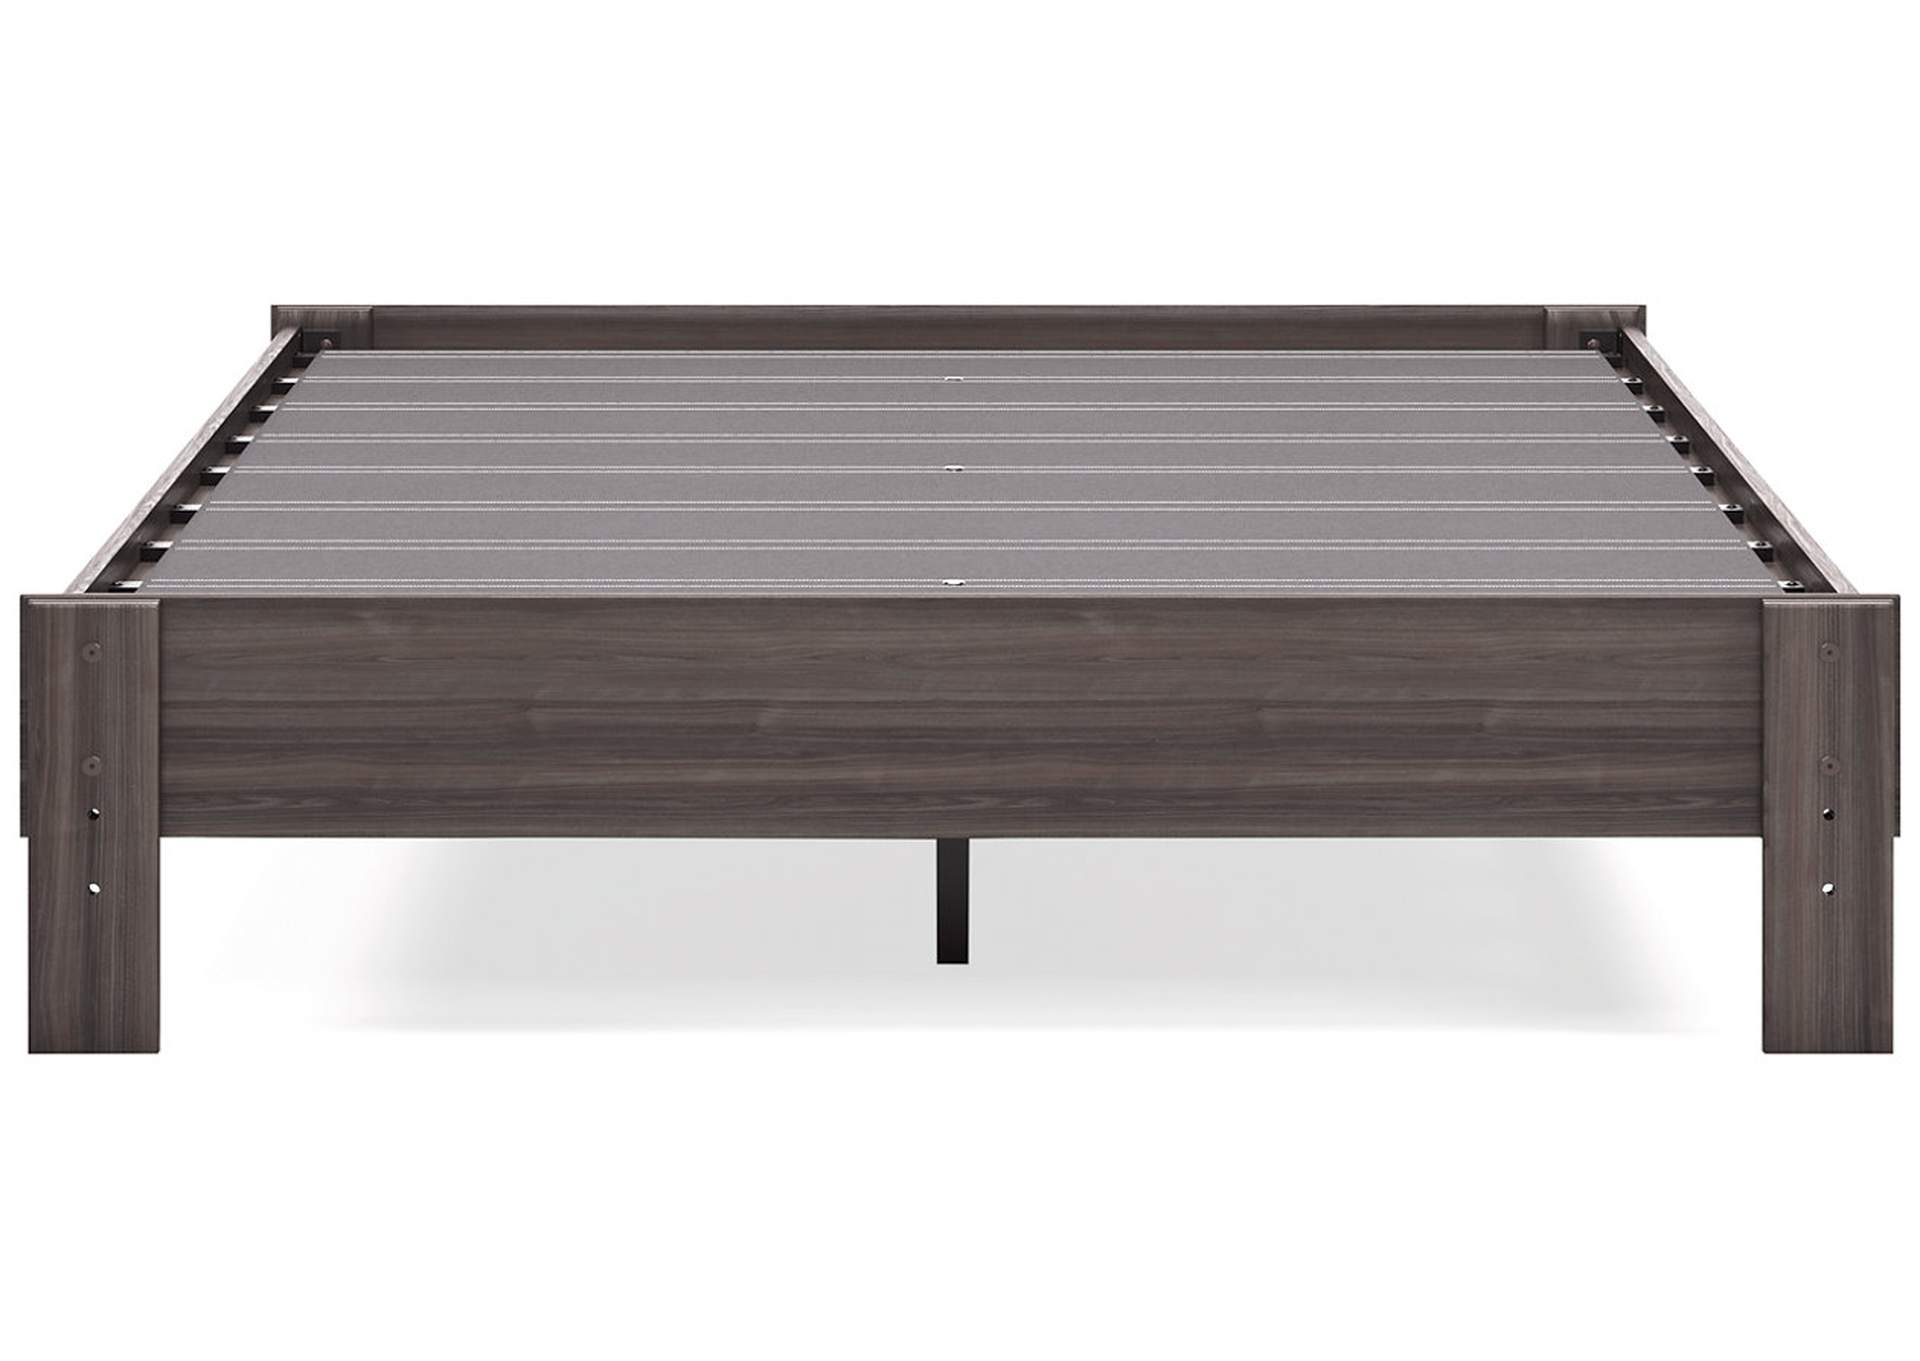 Brymont Queen Platform Bed,Direct To Consumer Express